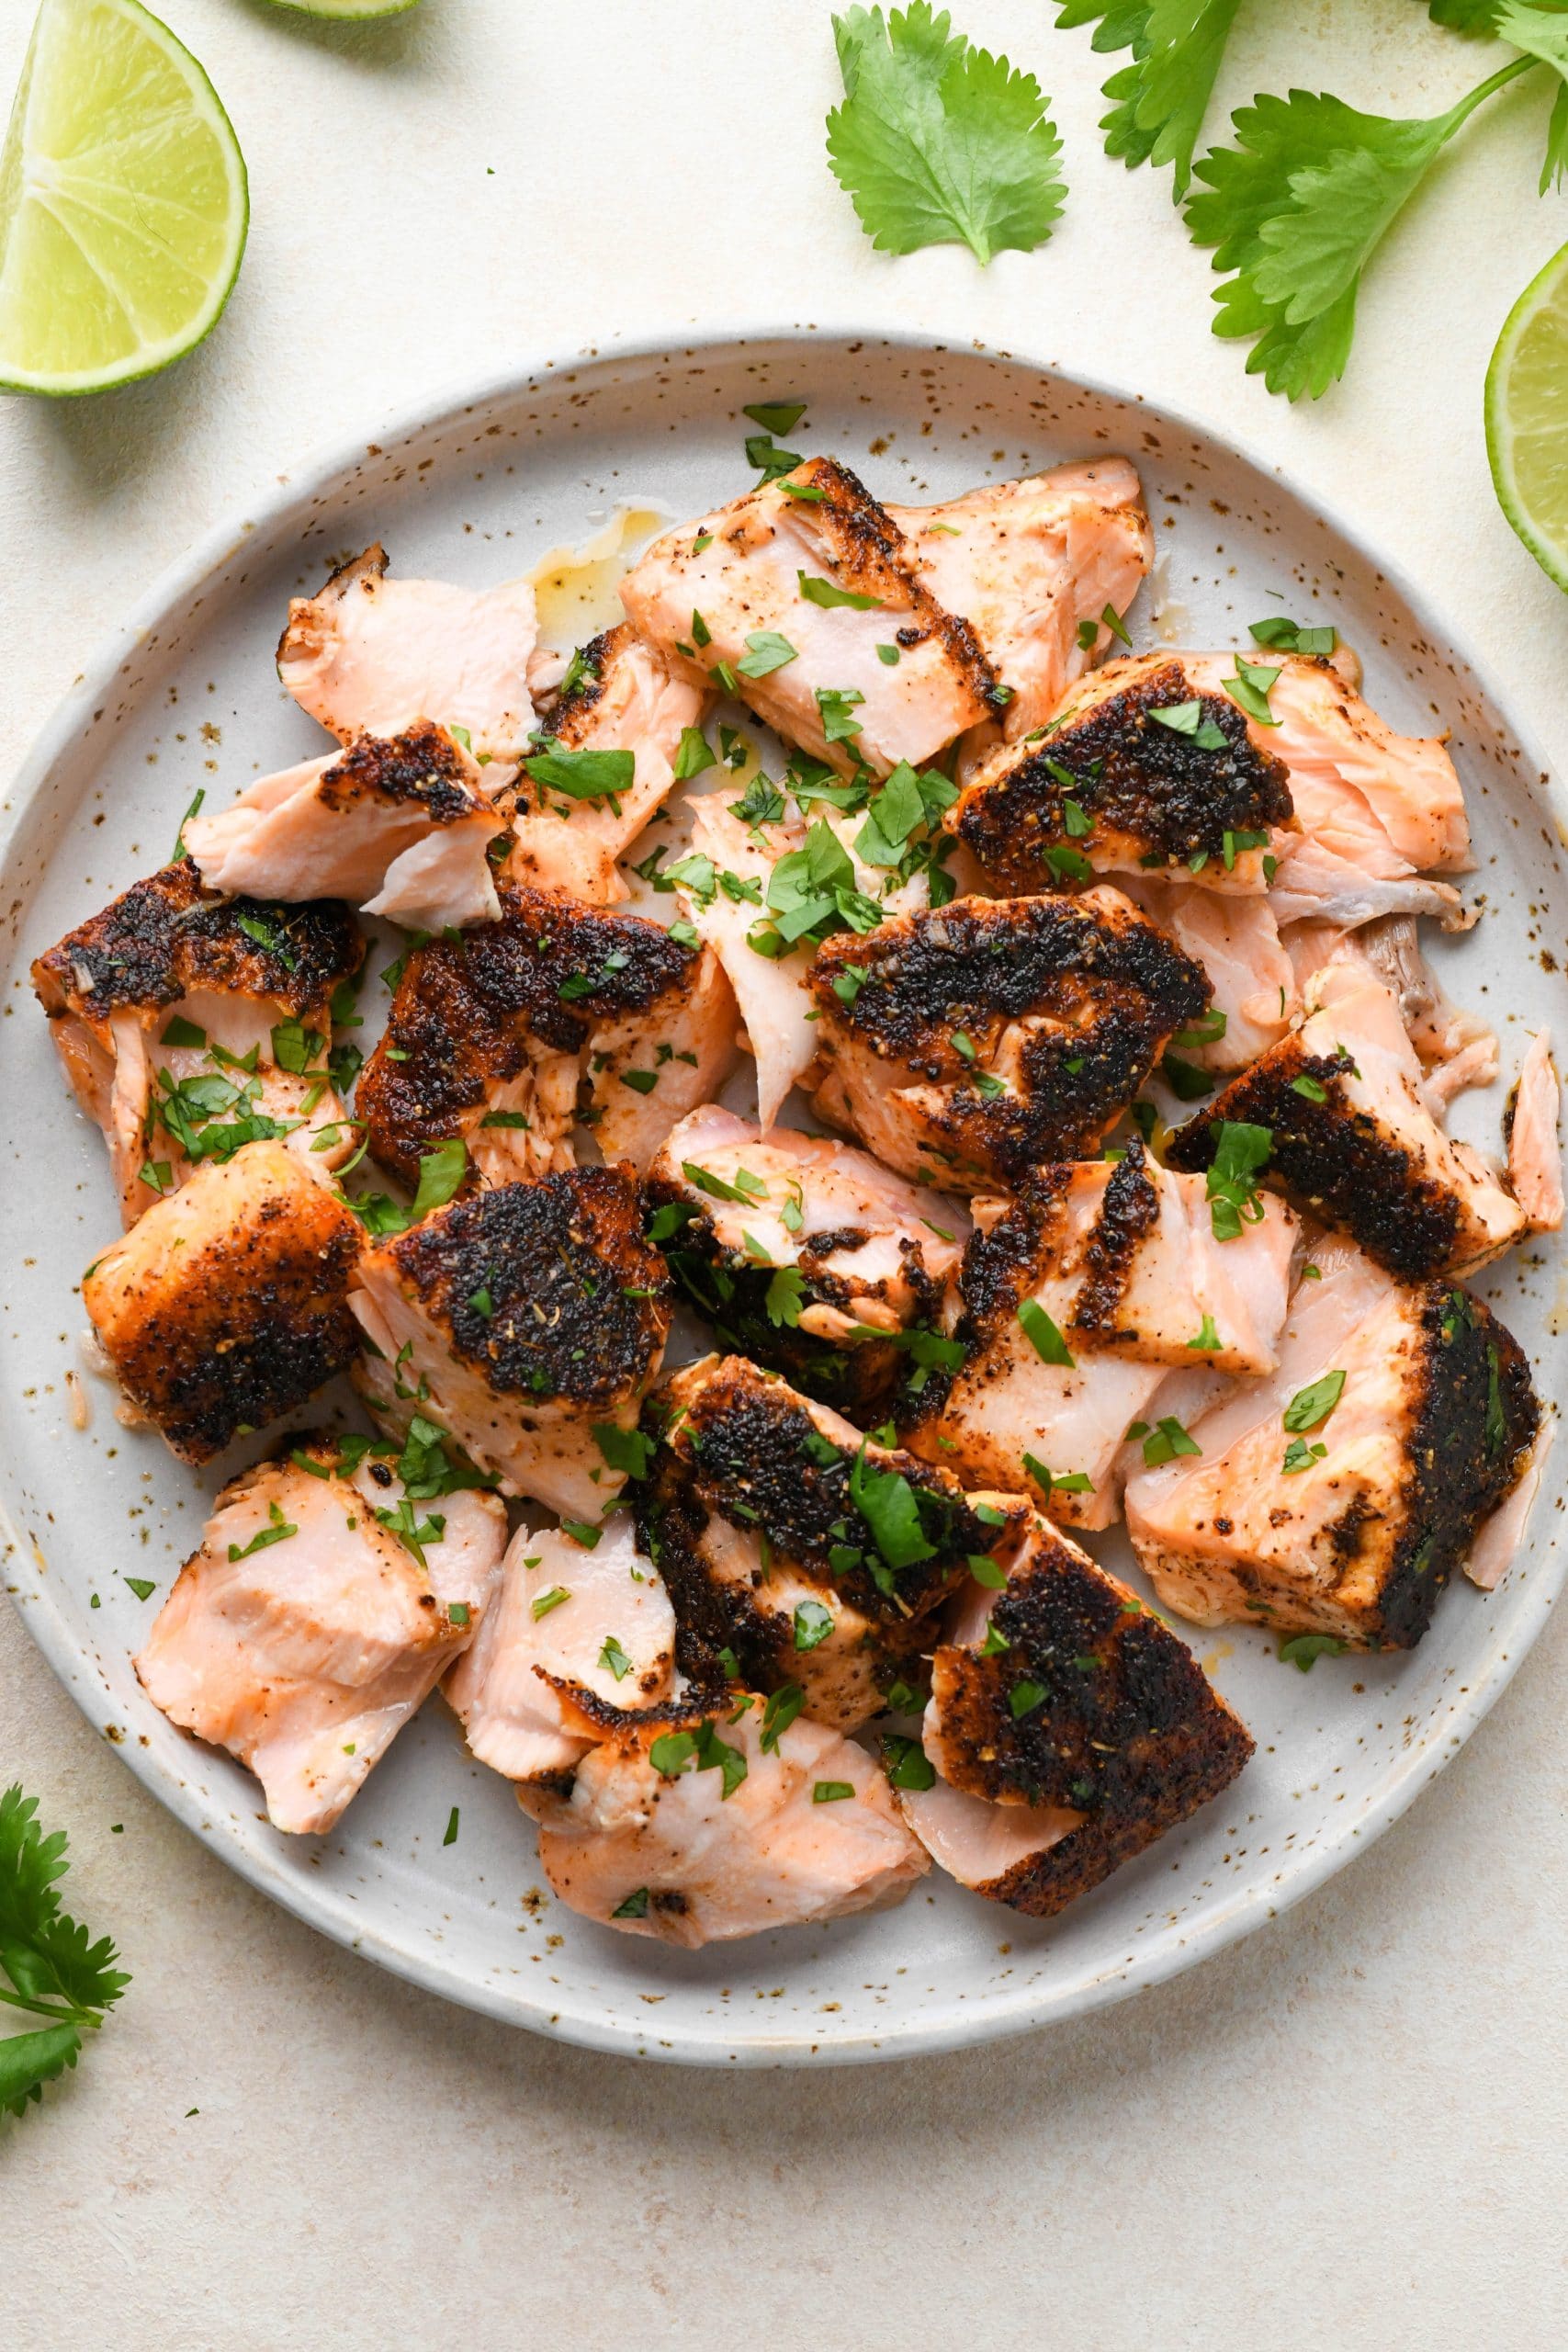 How to make blackened salmon tacos: Cooked salmon flaked on a plate.